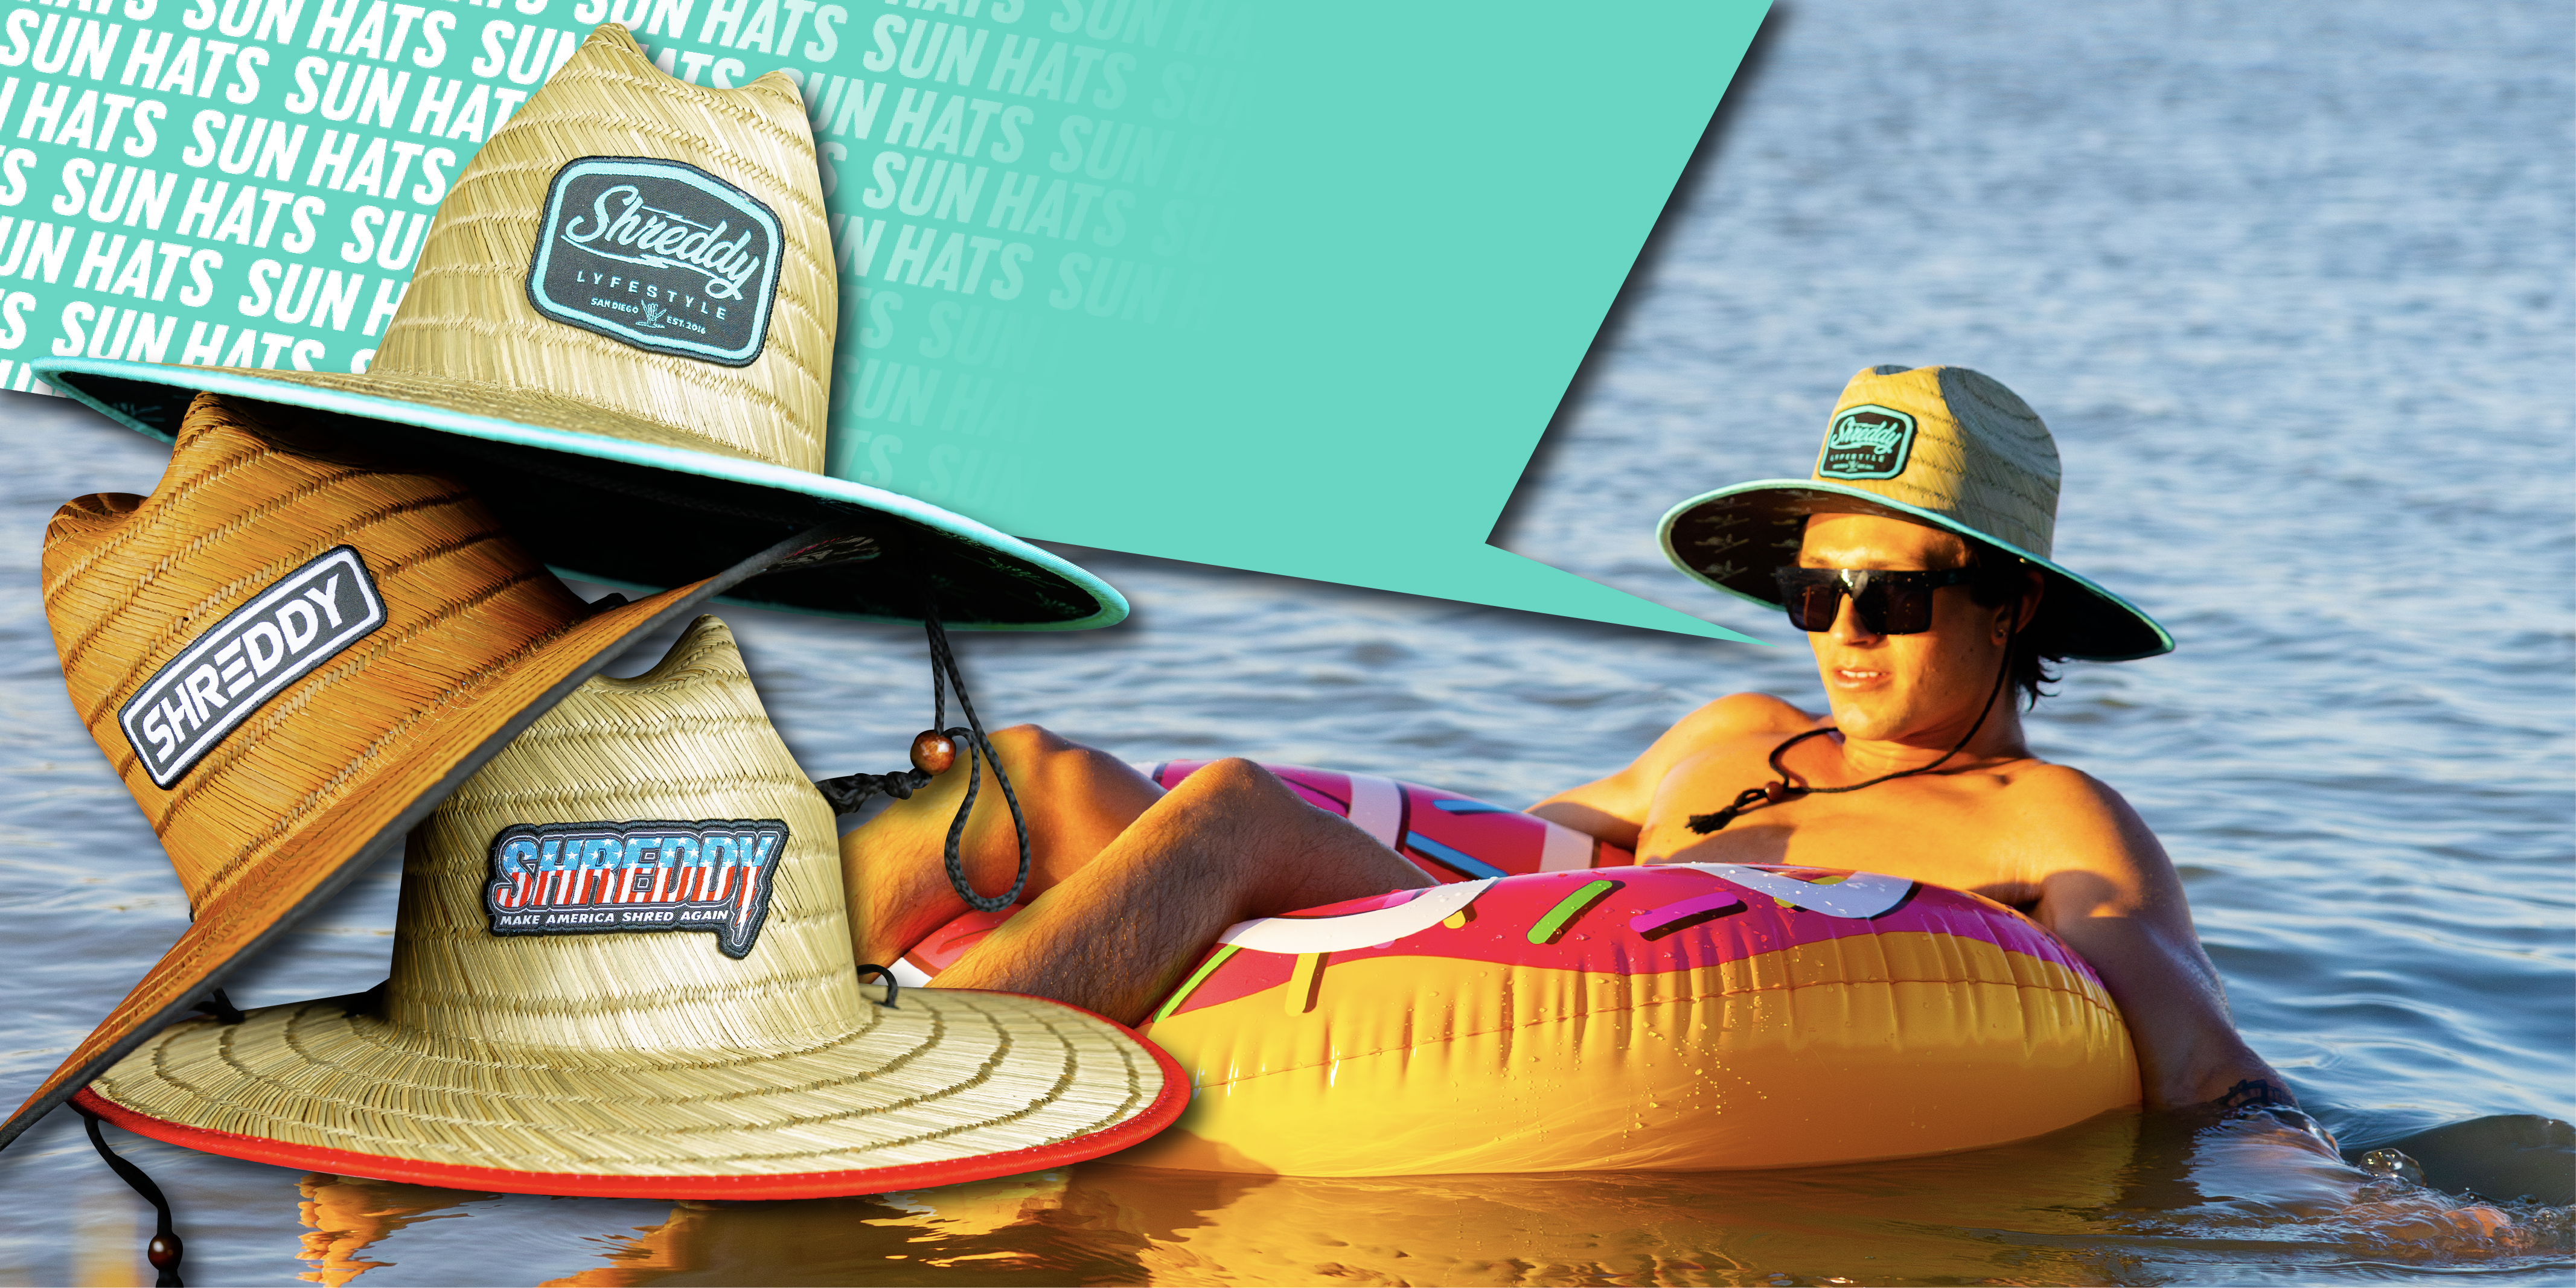 Sunhat Image - In River - Homepage